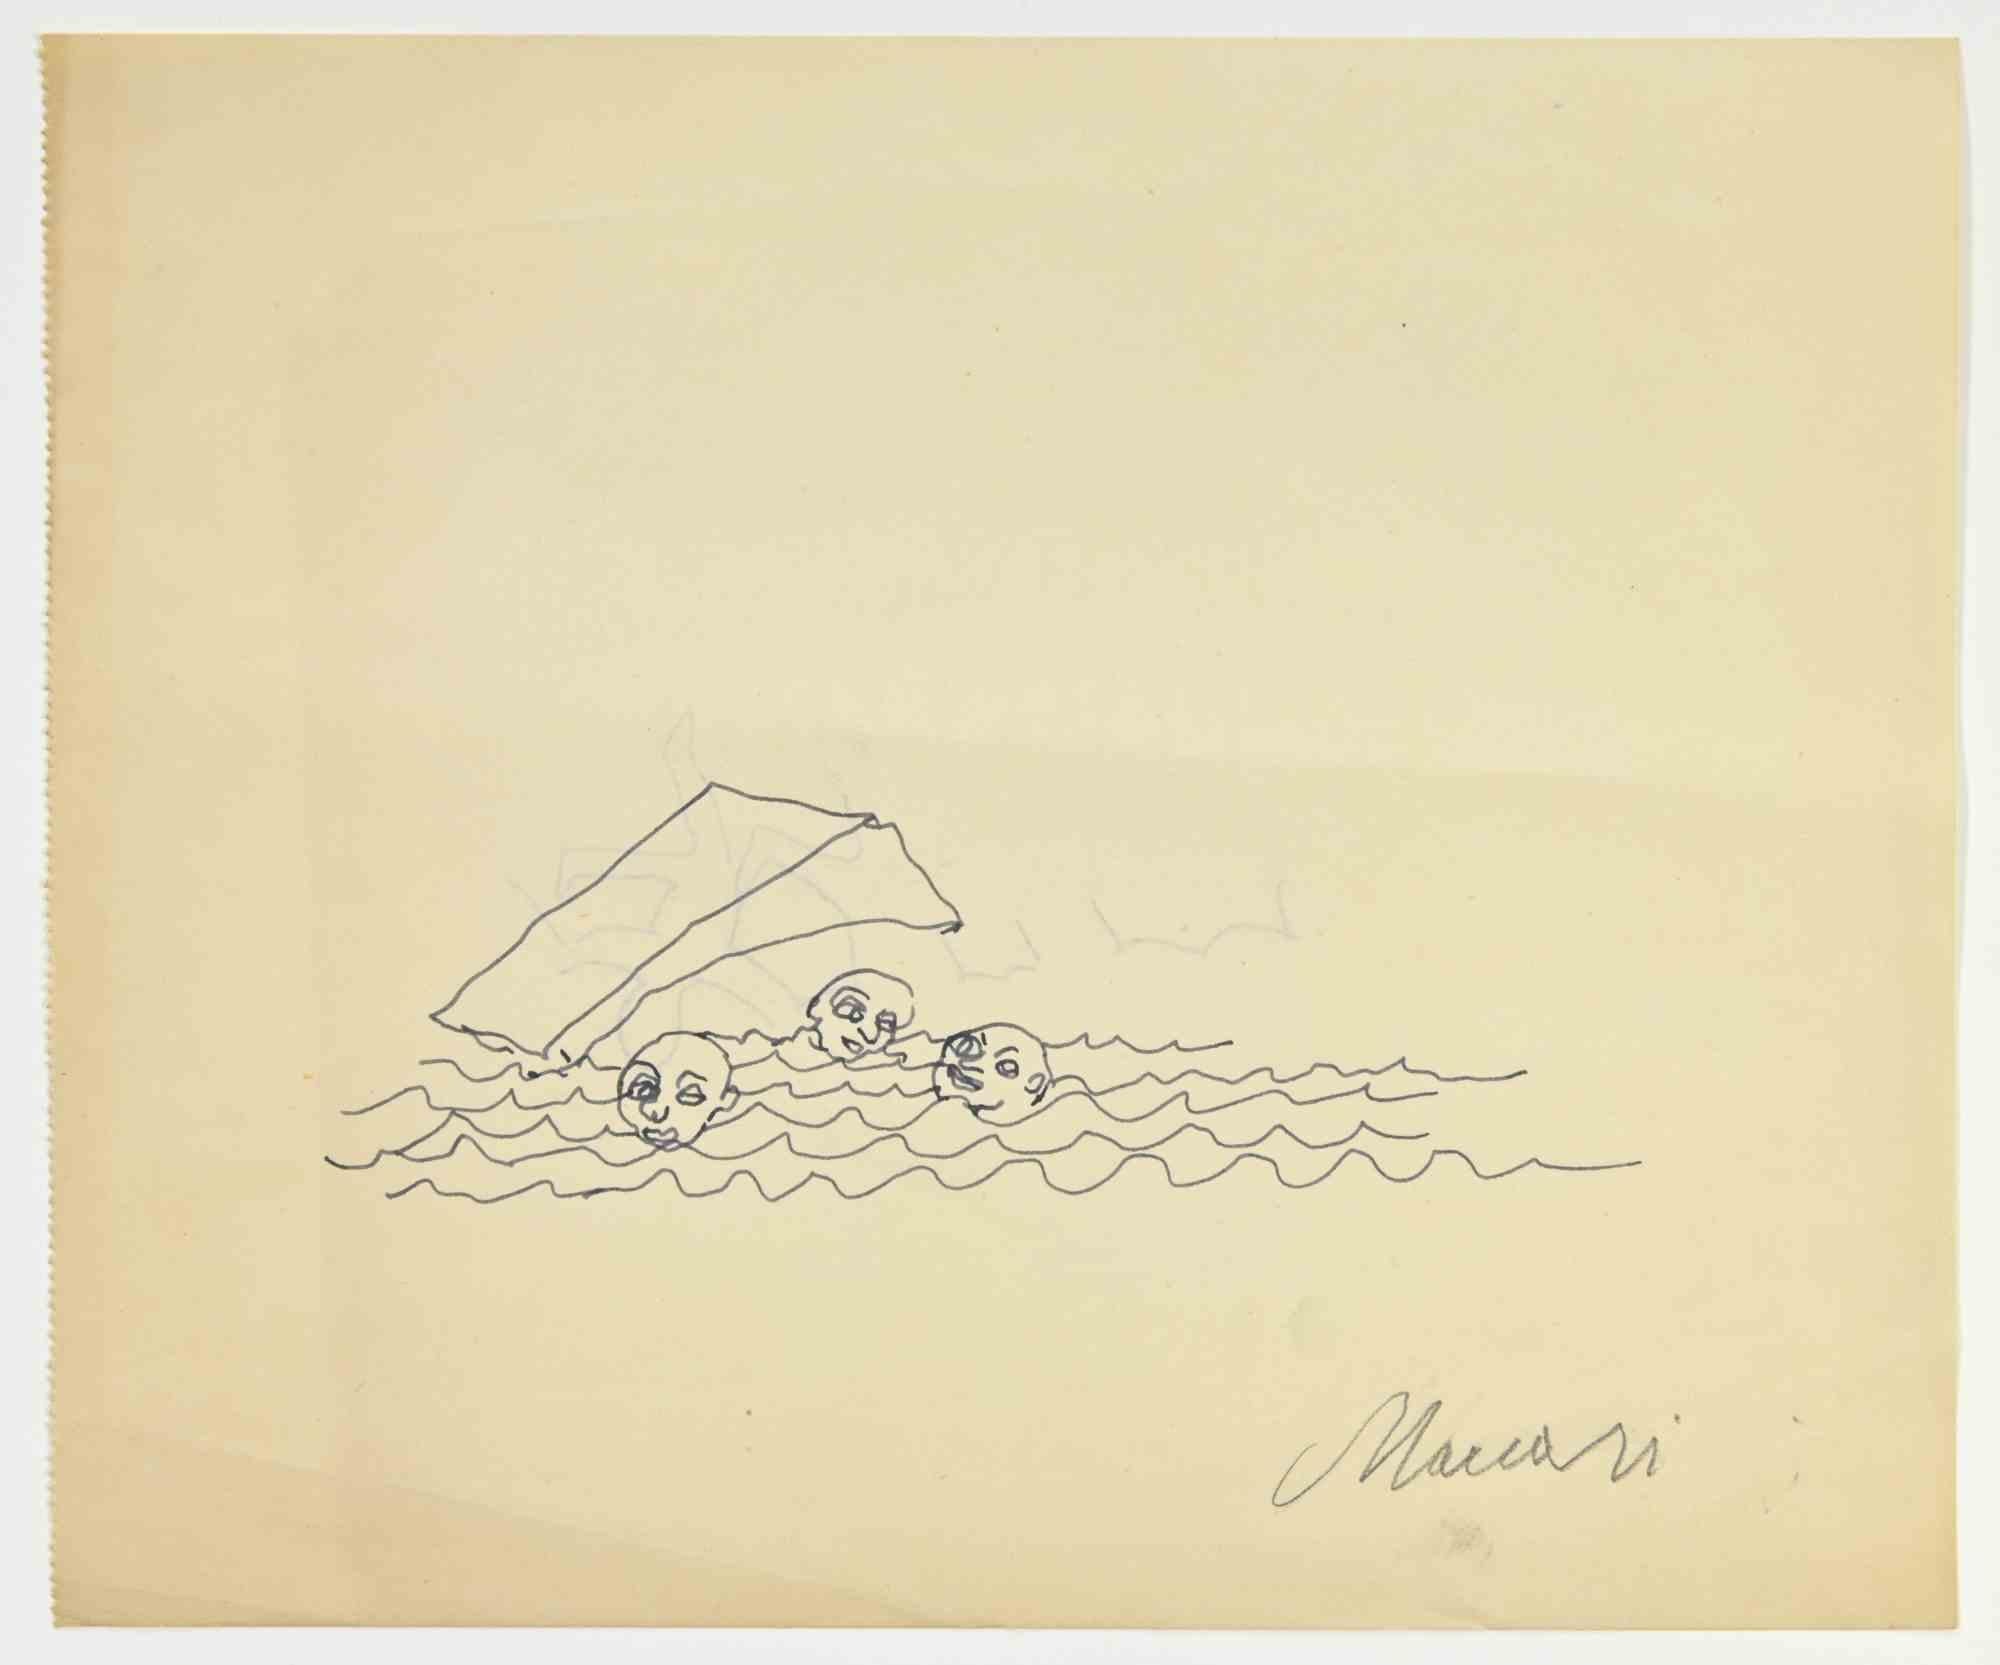 Swimmers is a pen Drawing realized by Mino Maccari  (1924-1989) in the 1950s.

Hand-signed on the lower, with another pen drawing on the rear.

Good condition.

Mino Maccari (Siena, 1924-Rome, June 16, 1989) was an Italian writer, painter, engraver